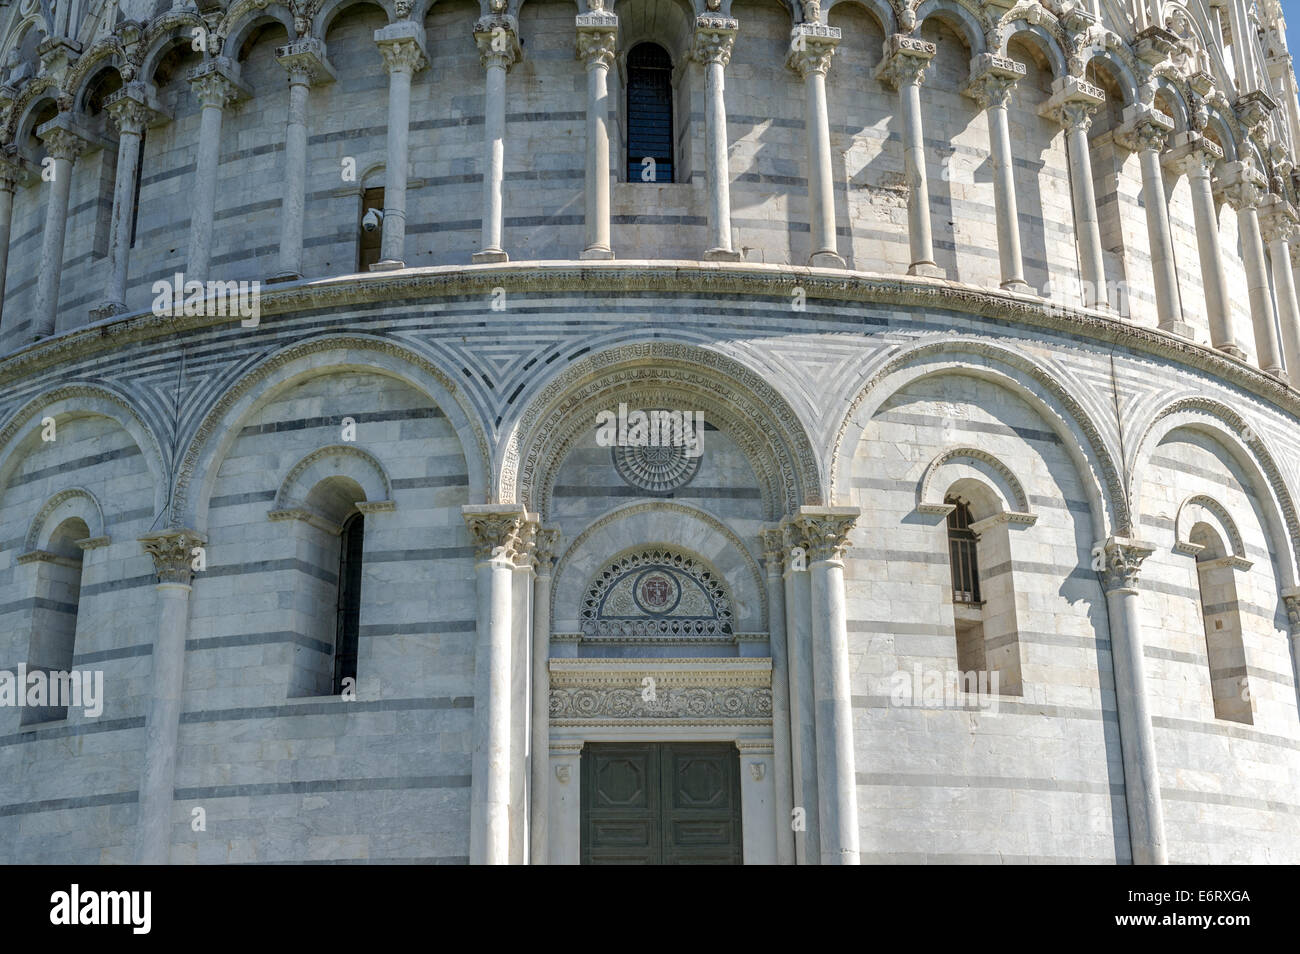 The Pisa Baptistery in the Square of Miracles, Pisa, Italy Stock Photo